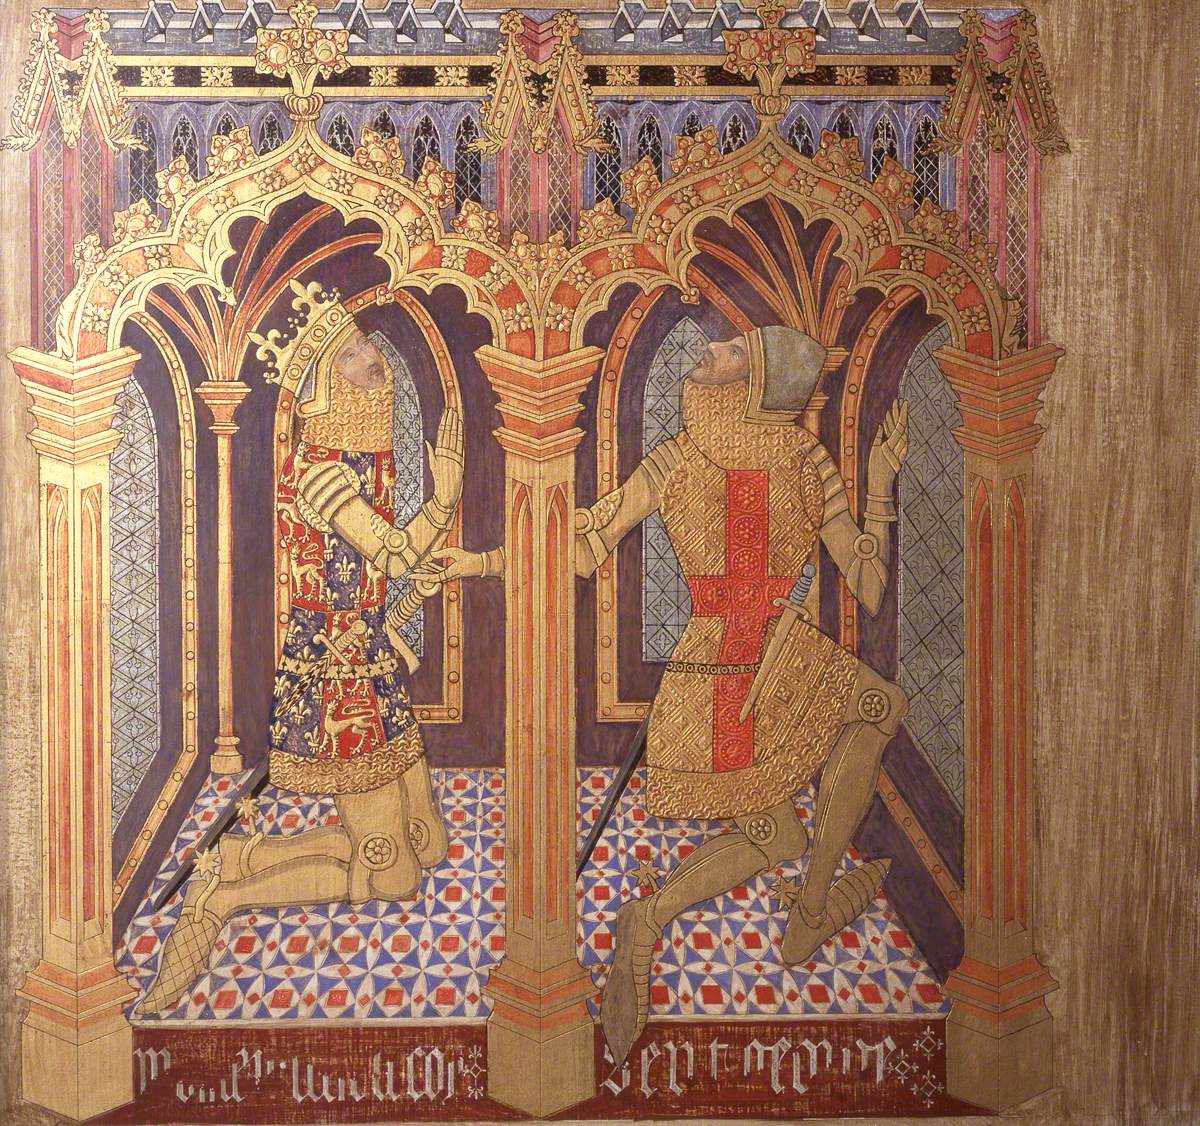 Reconstruction of Medieval Mural Painting, Donors King Edward and Saint George